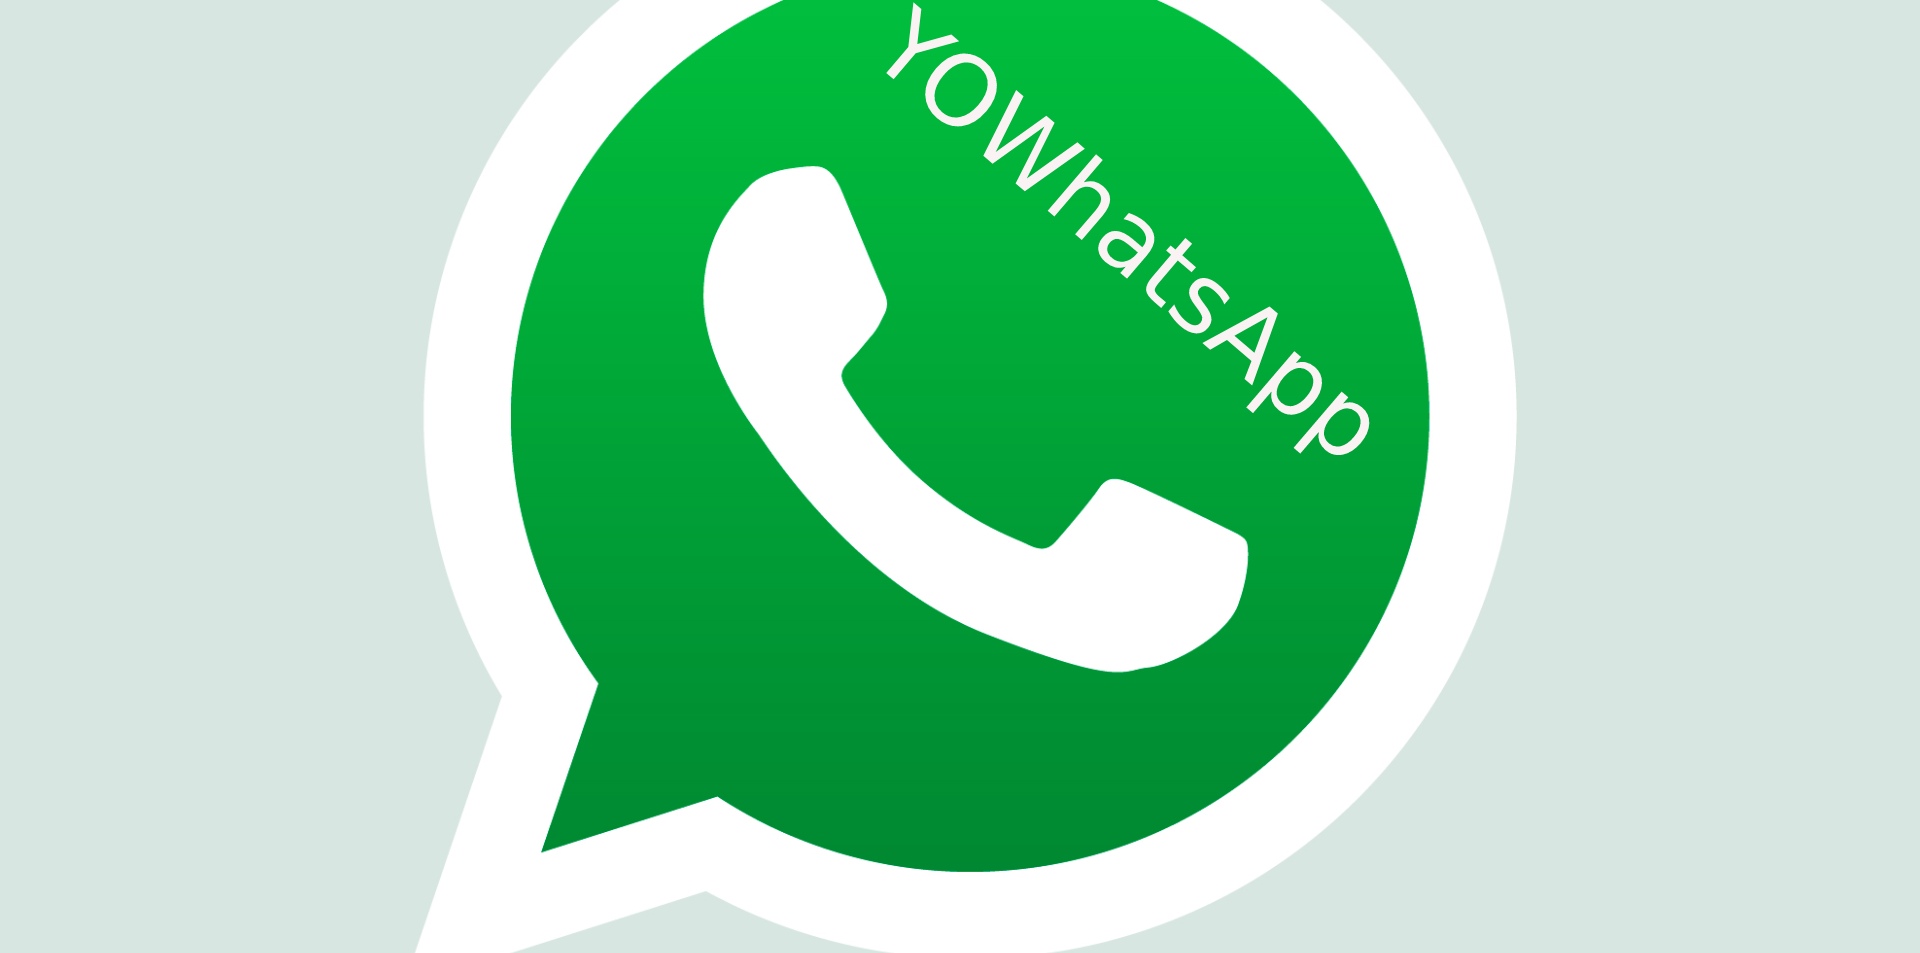 YOWhatsApp v14.02.0 download APK for ioS, Android, PC and Mac